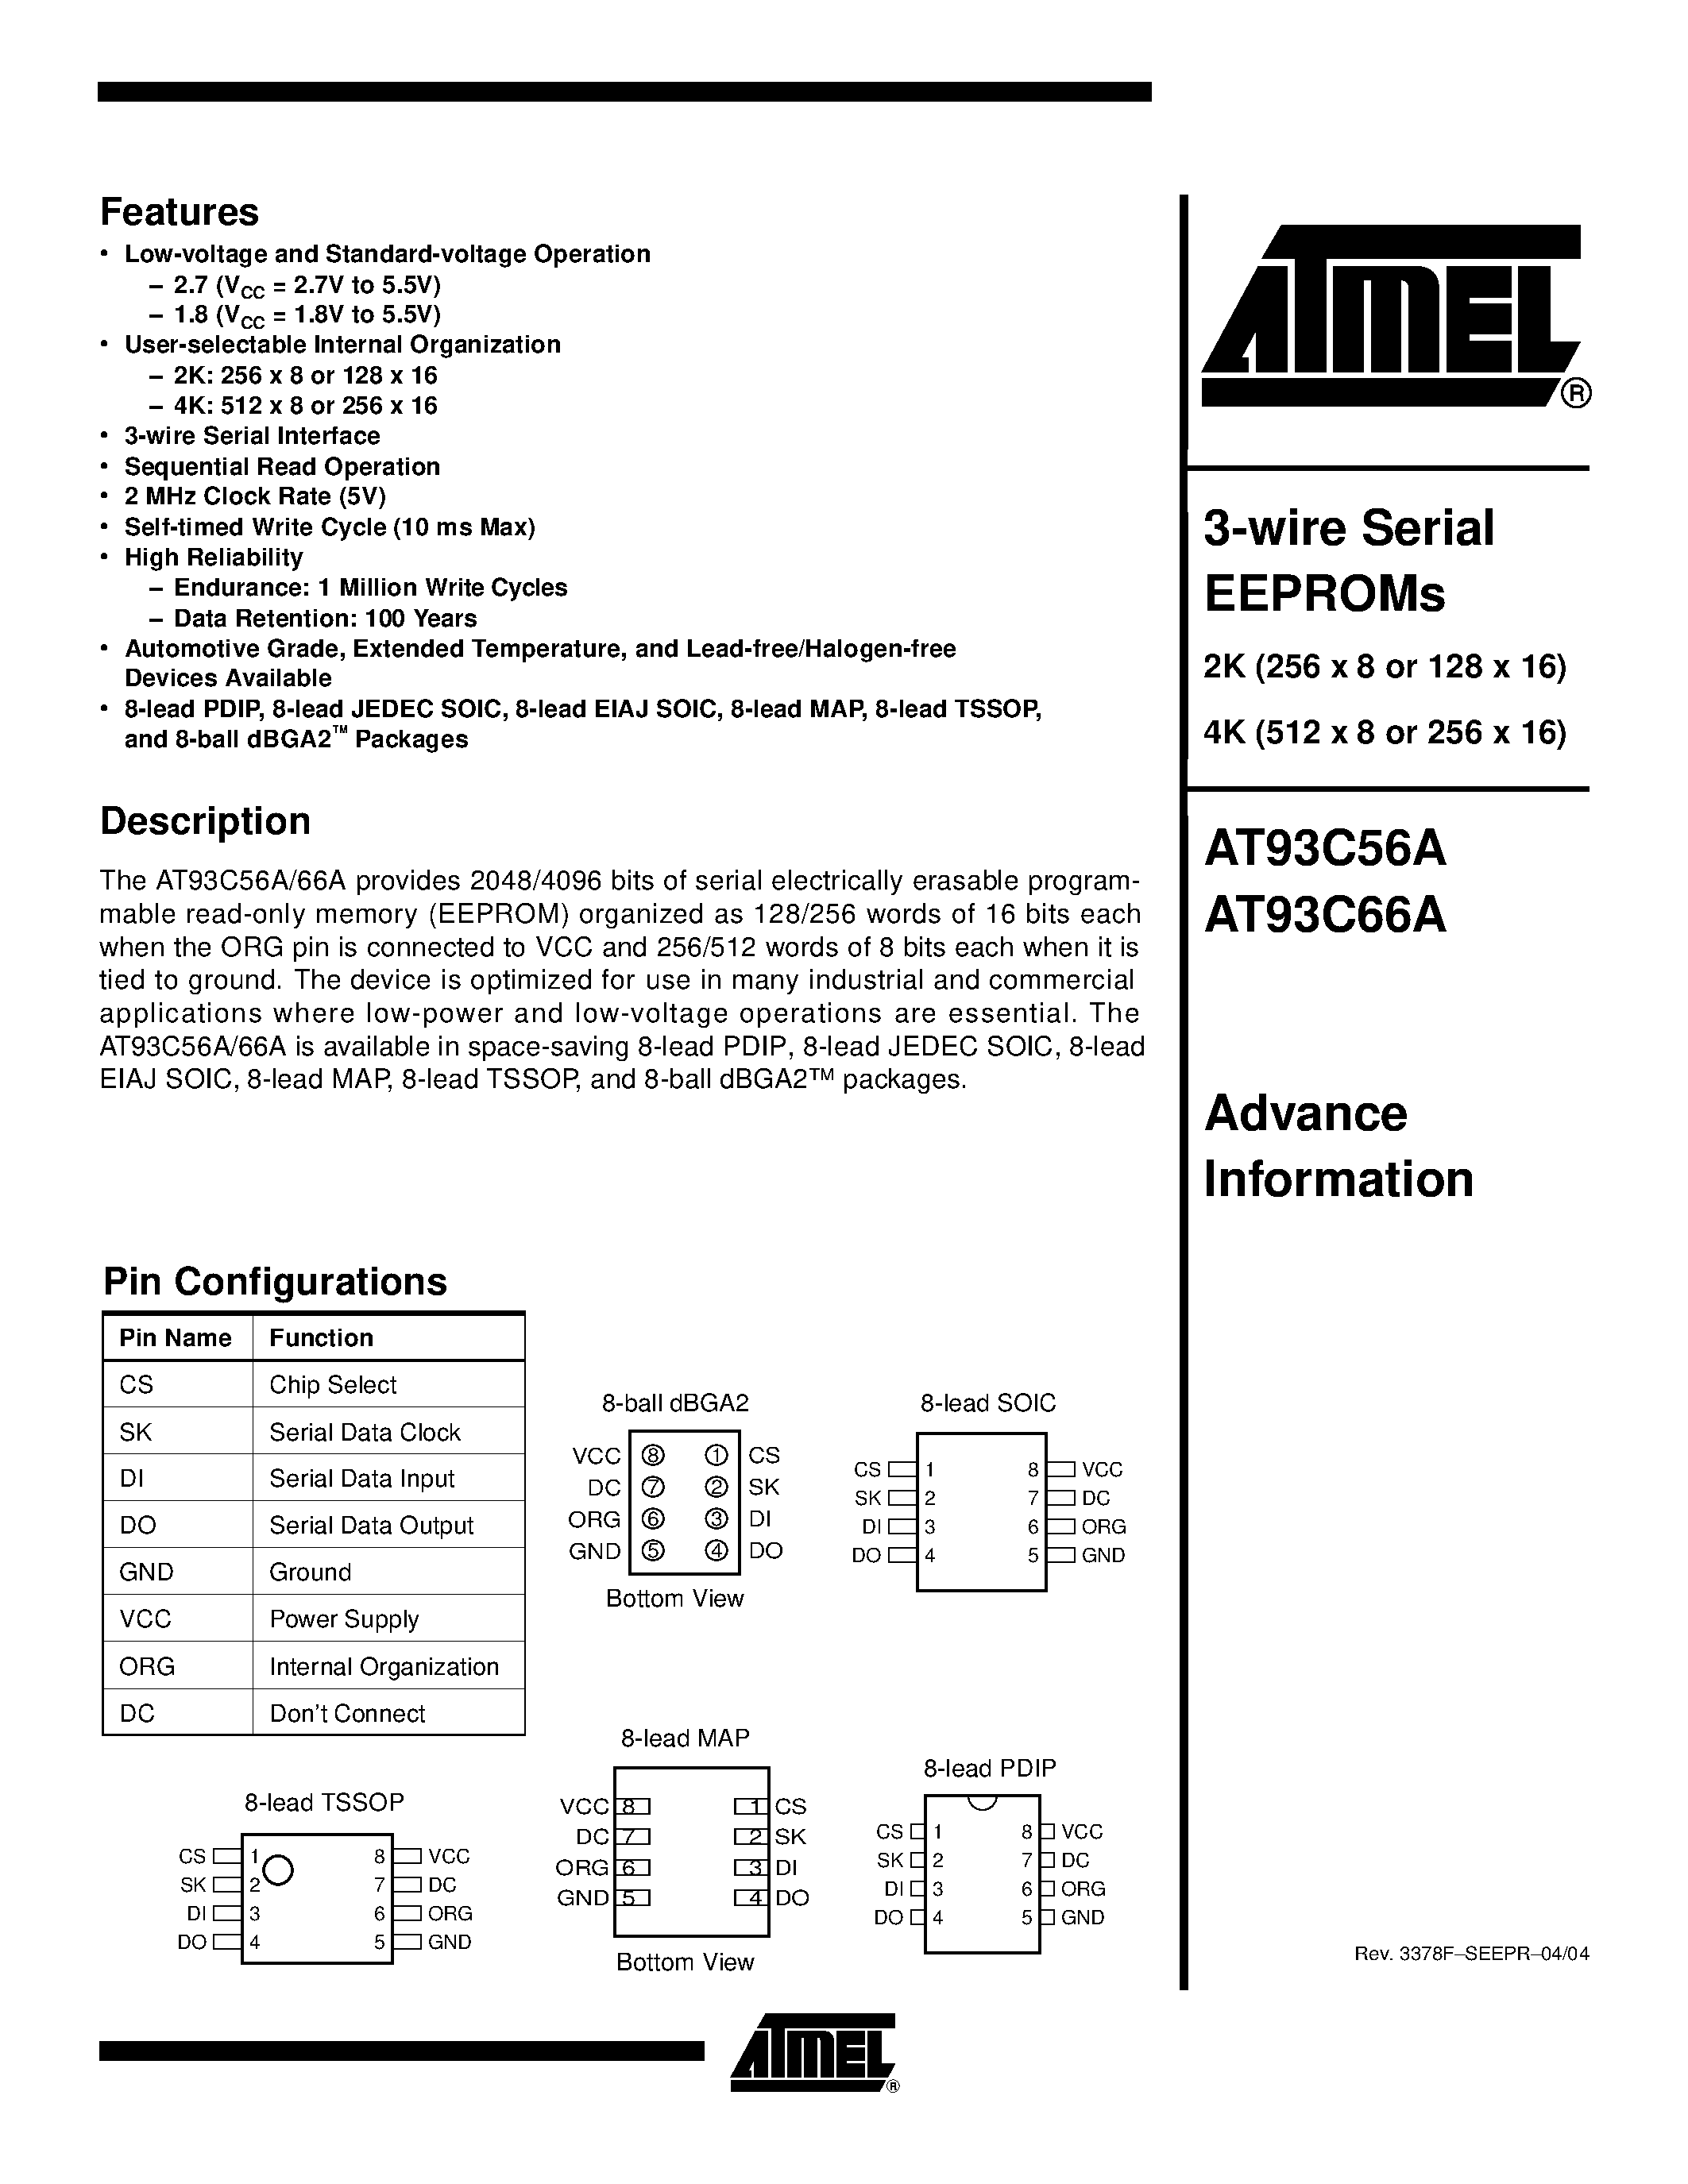 Datasheet AT93C66A-10TI-1.8 - 3-wire Serial EEPROMs 2K (256 x 8 or 128 x 16) page 1